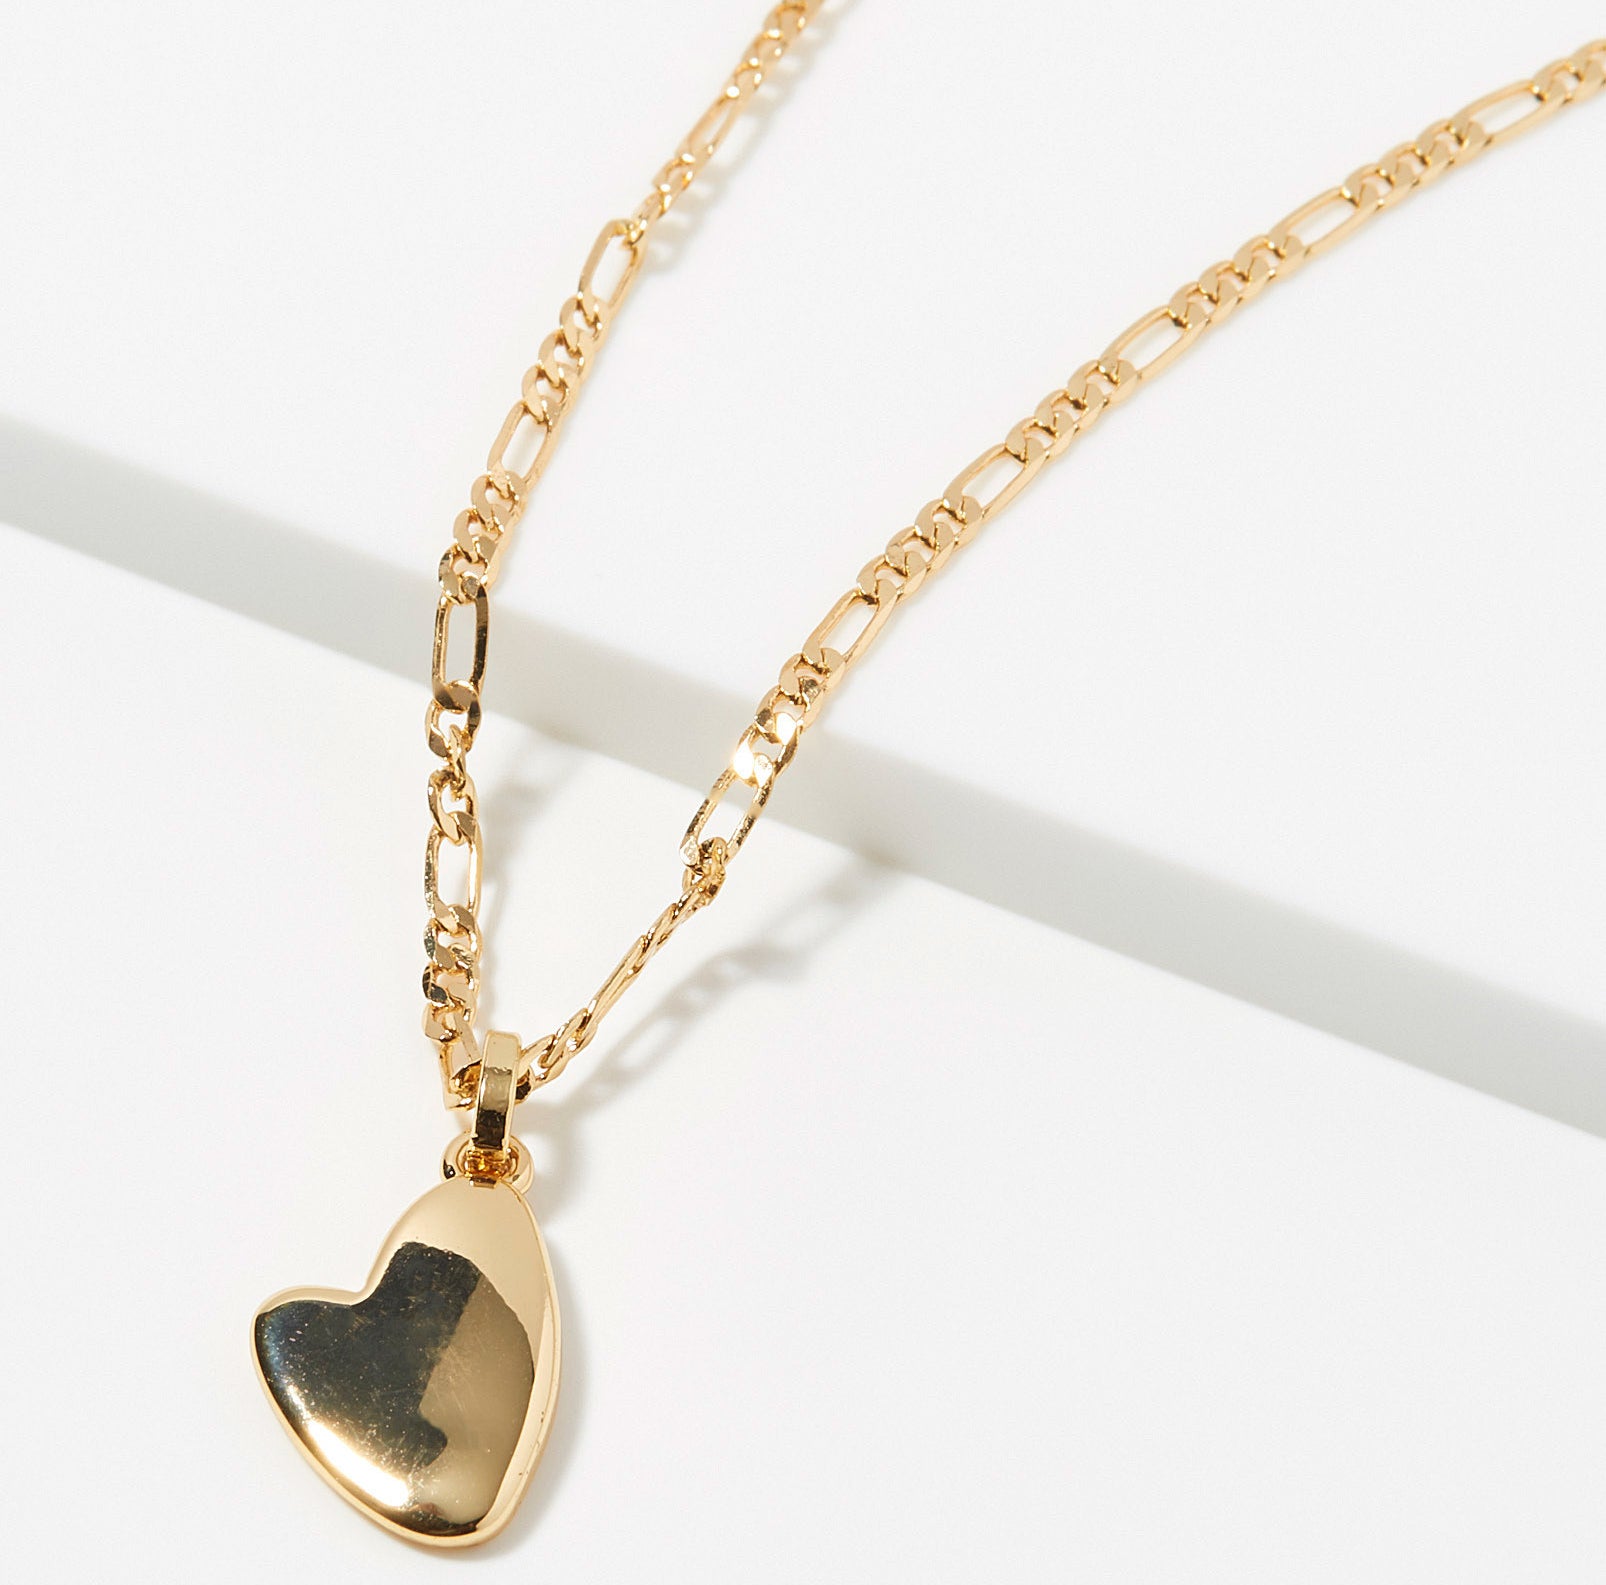 A gold chain necklace with a heart-shaped pendant